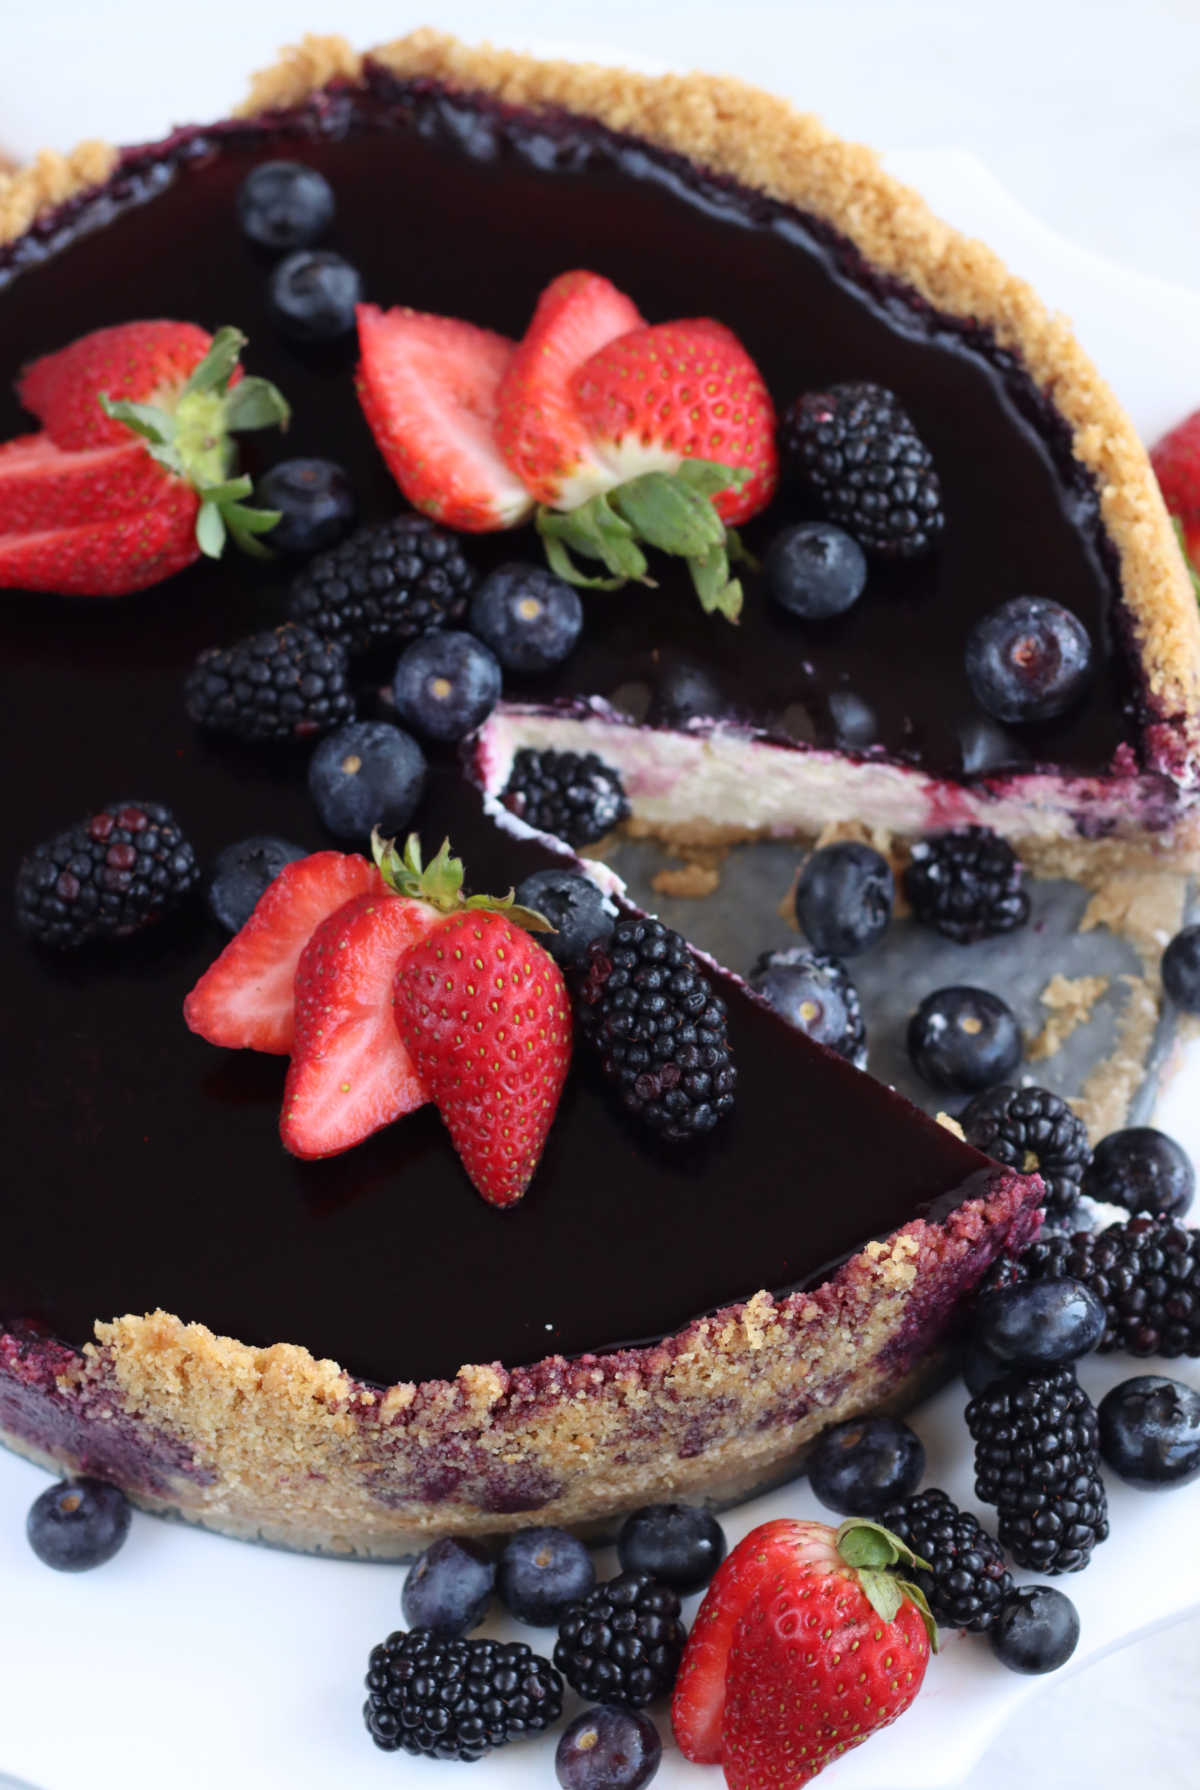 Cheesecake with berry topping, graham cracker crust, fresh berries with slice cut out.